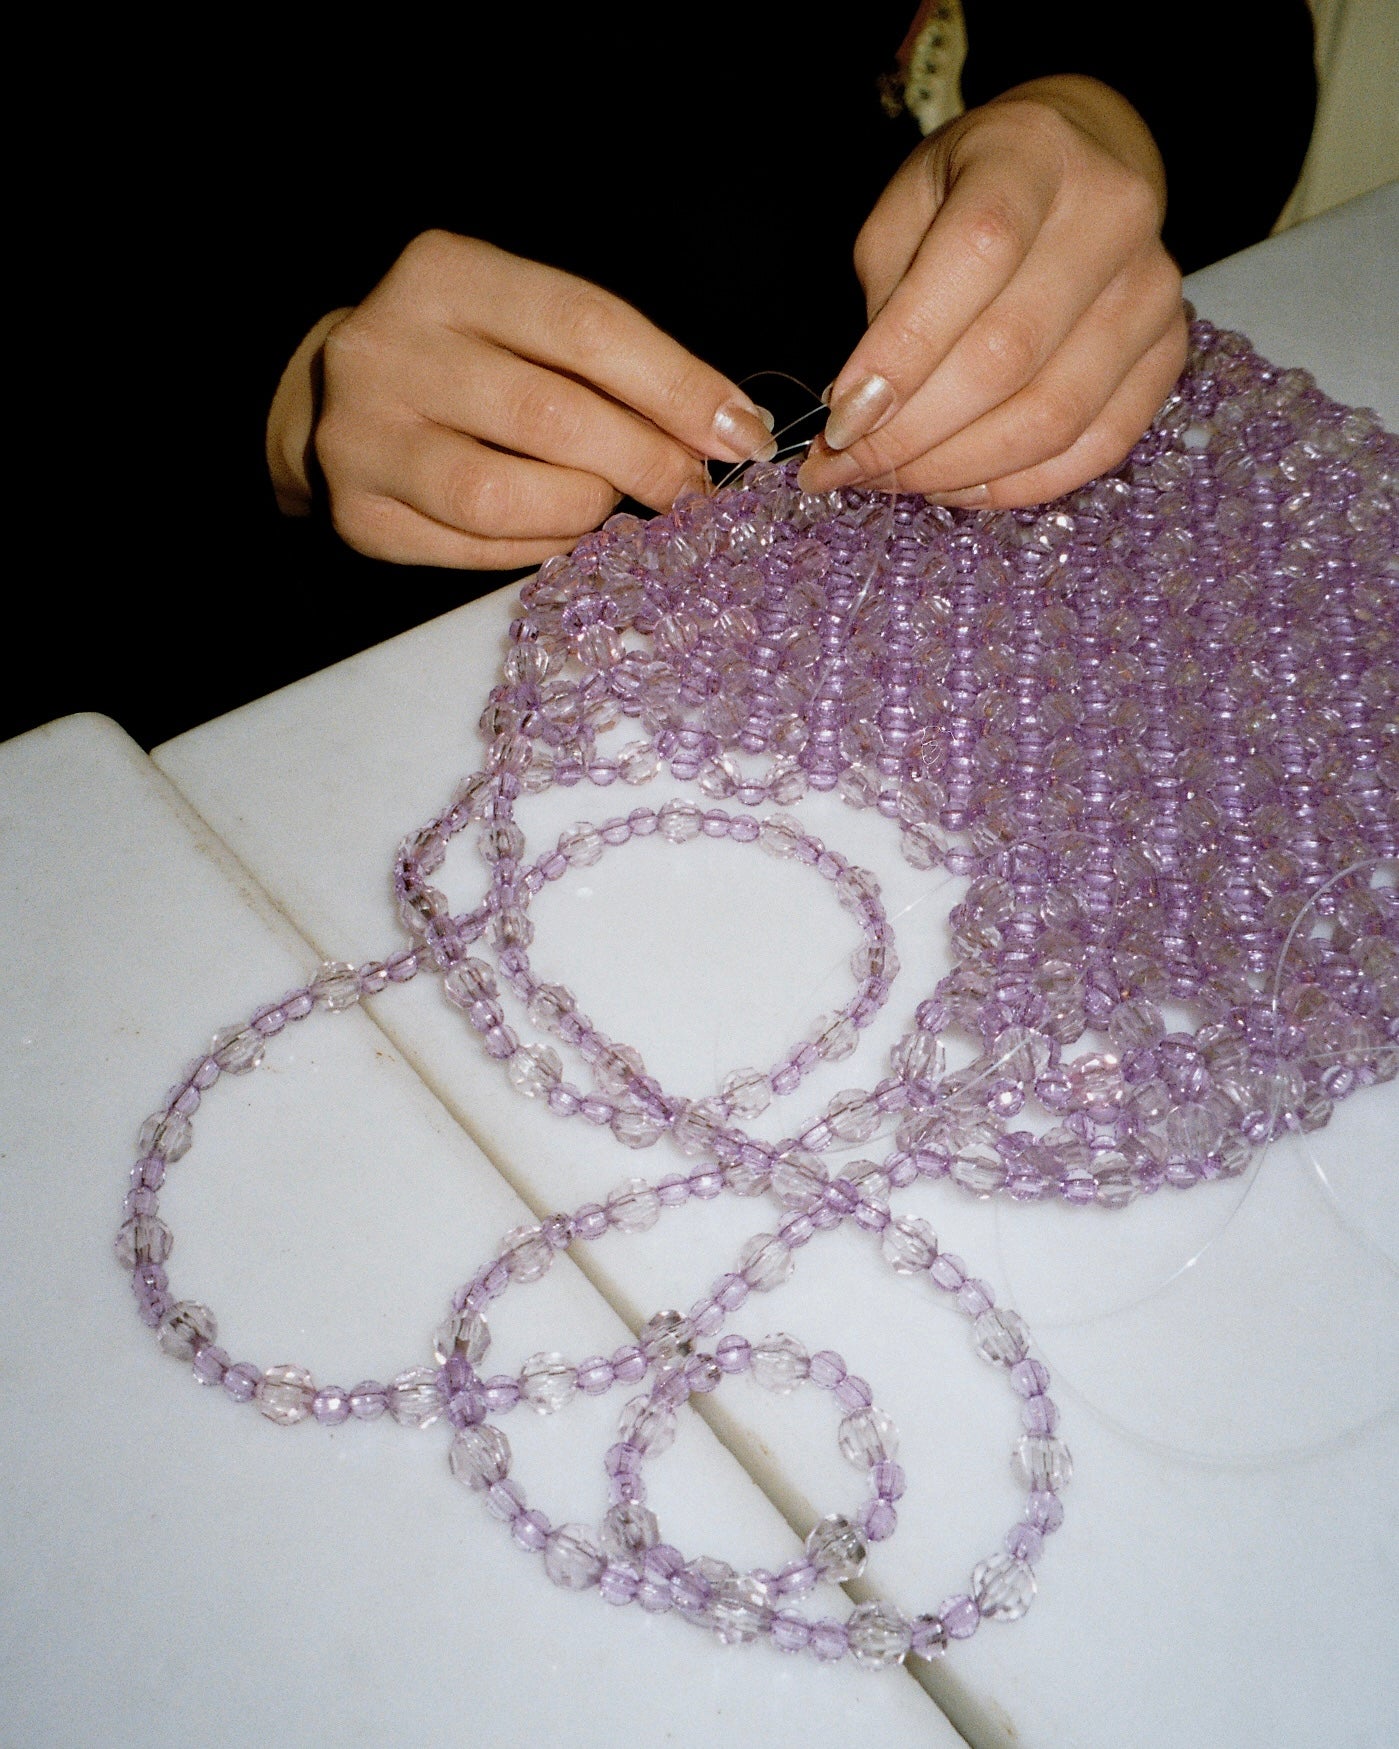 Two hands holding a needle and sewing a handmade beaded bag for Studio 7 Zurich